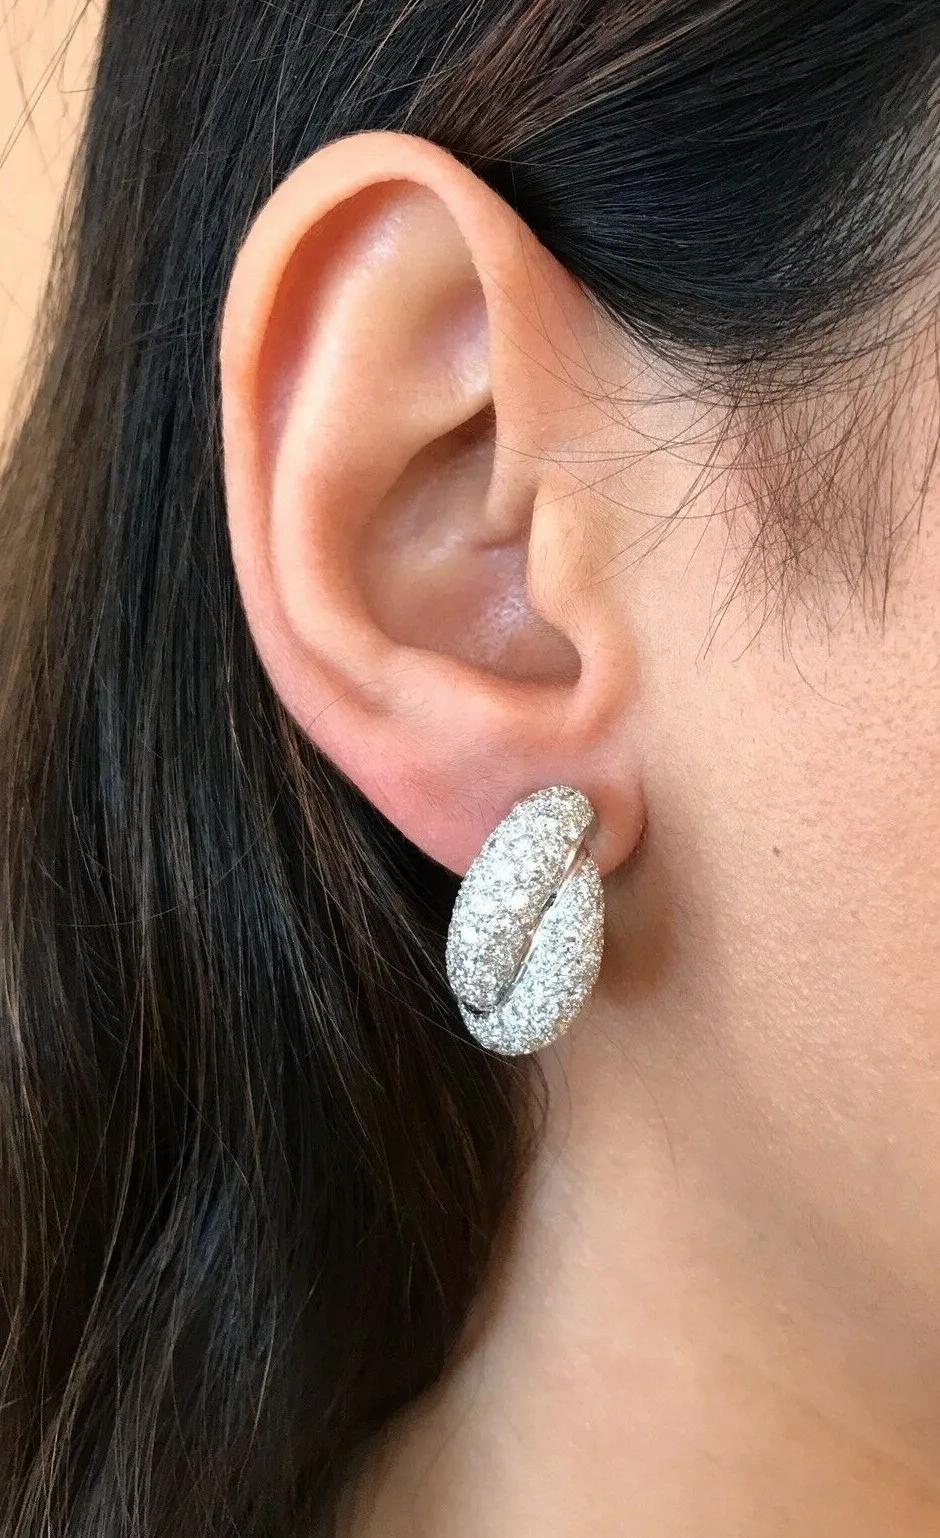 French made Pavé Diamond Twist Earrings in 18k White Gold

Double Row Pavé Twist Earrings feature 4.48 carats of Round Brilliant Diamonds Pavé set in 18k White Gold. The earrings are clip-on style for non-pierced ears.

Total diamond weight is 4.48